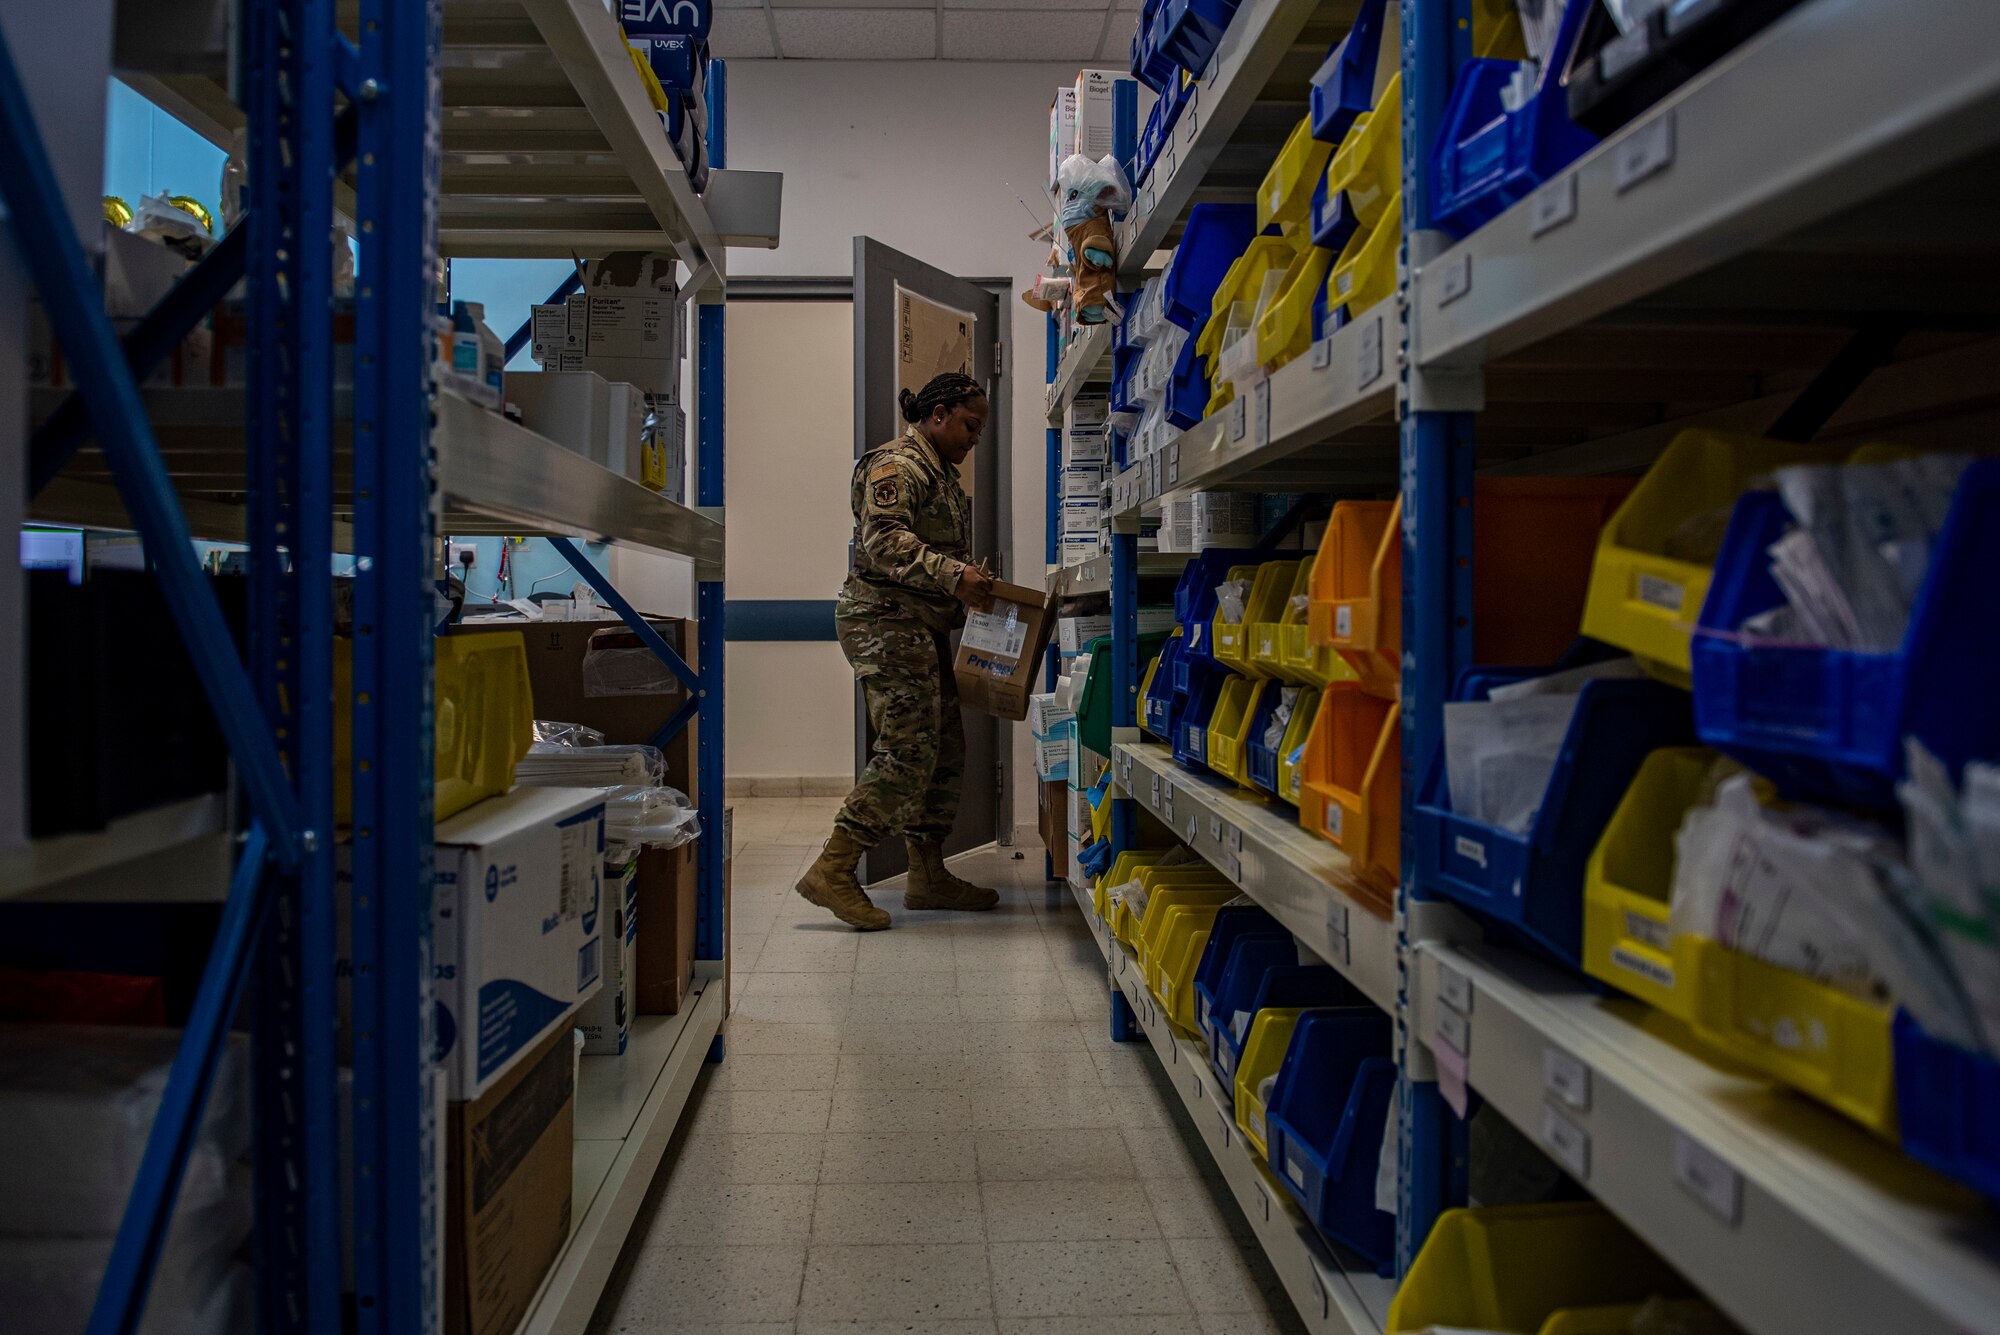 Tech. Sgt. Aleeda Reagan, 379th Expeditionary Medical Support Squadron customer service noncommissioned officer in charge, restocks a medical treatment facility with clinical supplies Aug. 3, 2021, at Al Udeid Air Base, Qatar.